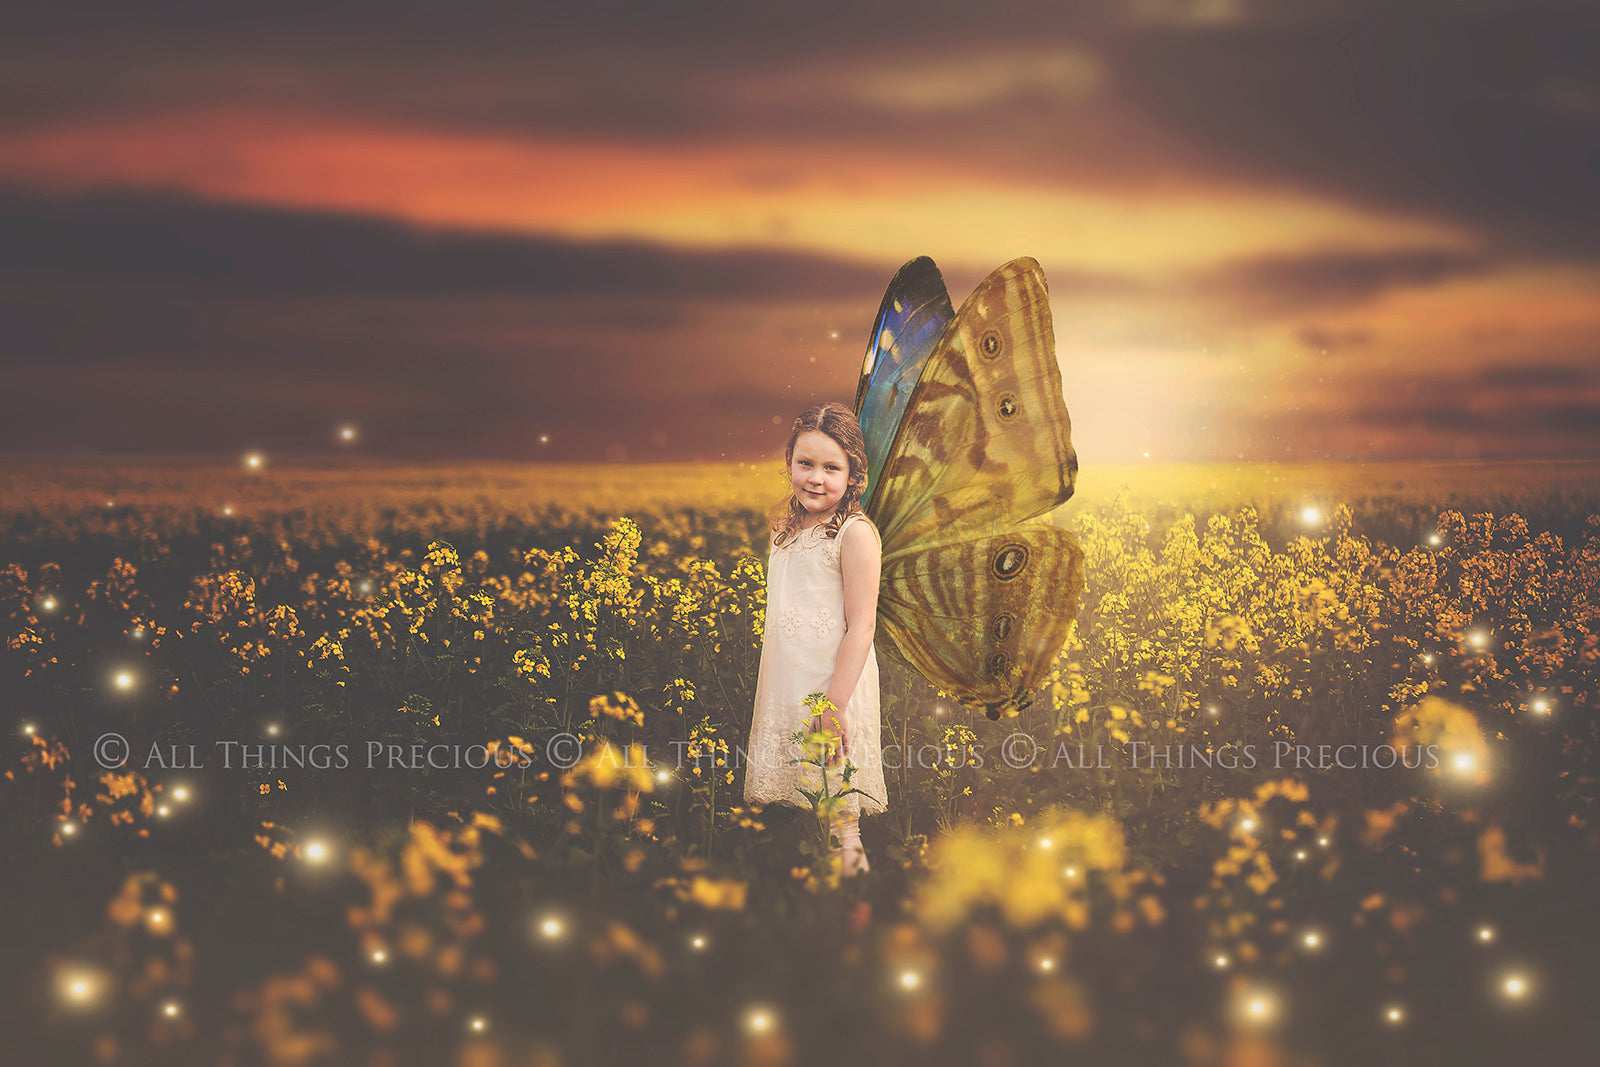 Butterfly fairy wings, Png overlays for photoshop. Photography editing. High resolution, 300dpi. Overlay for photography. Digital stock and resources. Graphic design. Wings for Photos. Colourful Faerie Wings. Butterflies. Overlays for Edits.